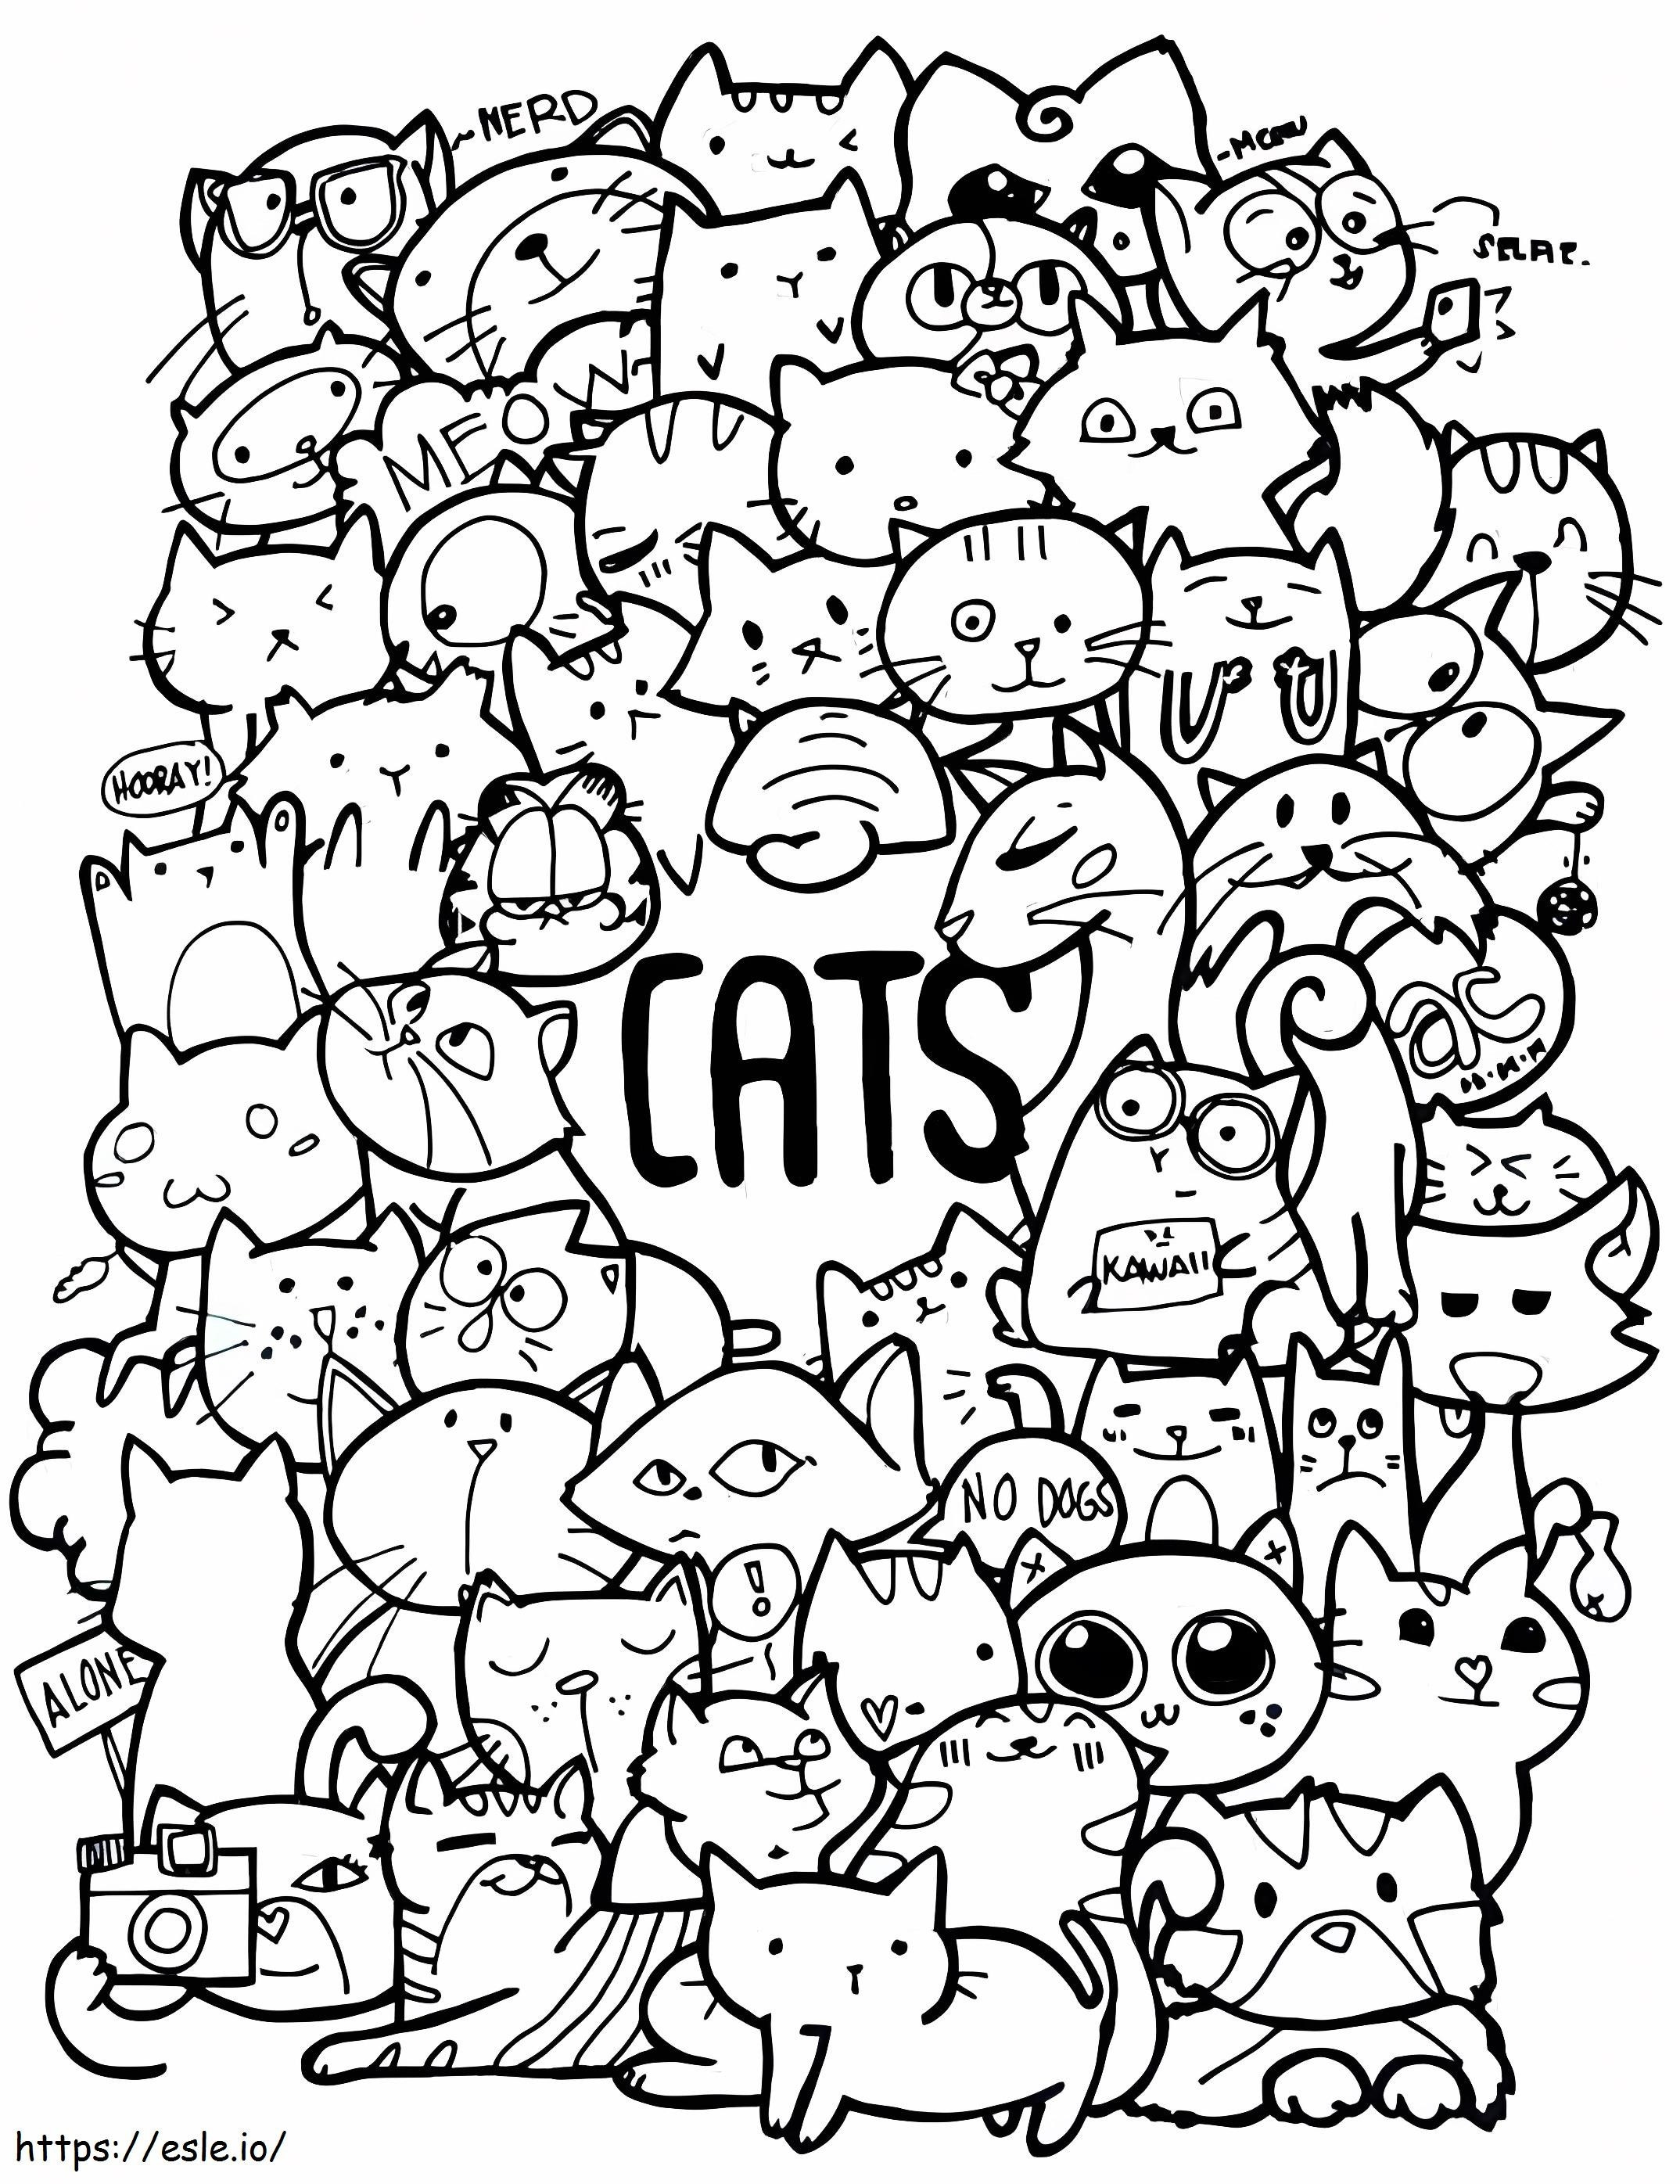 Cat Aesthetics coloring page